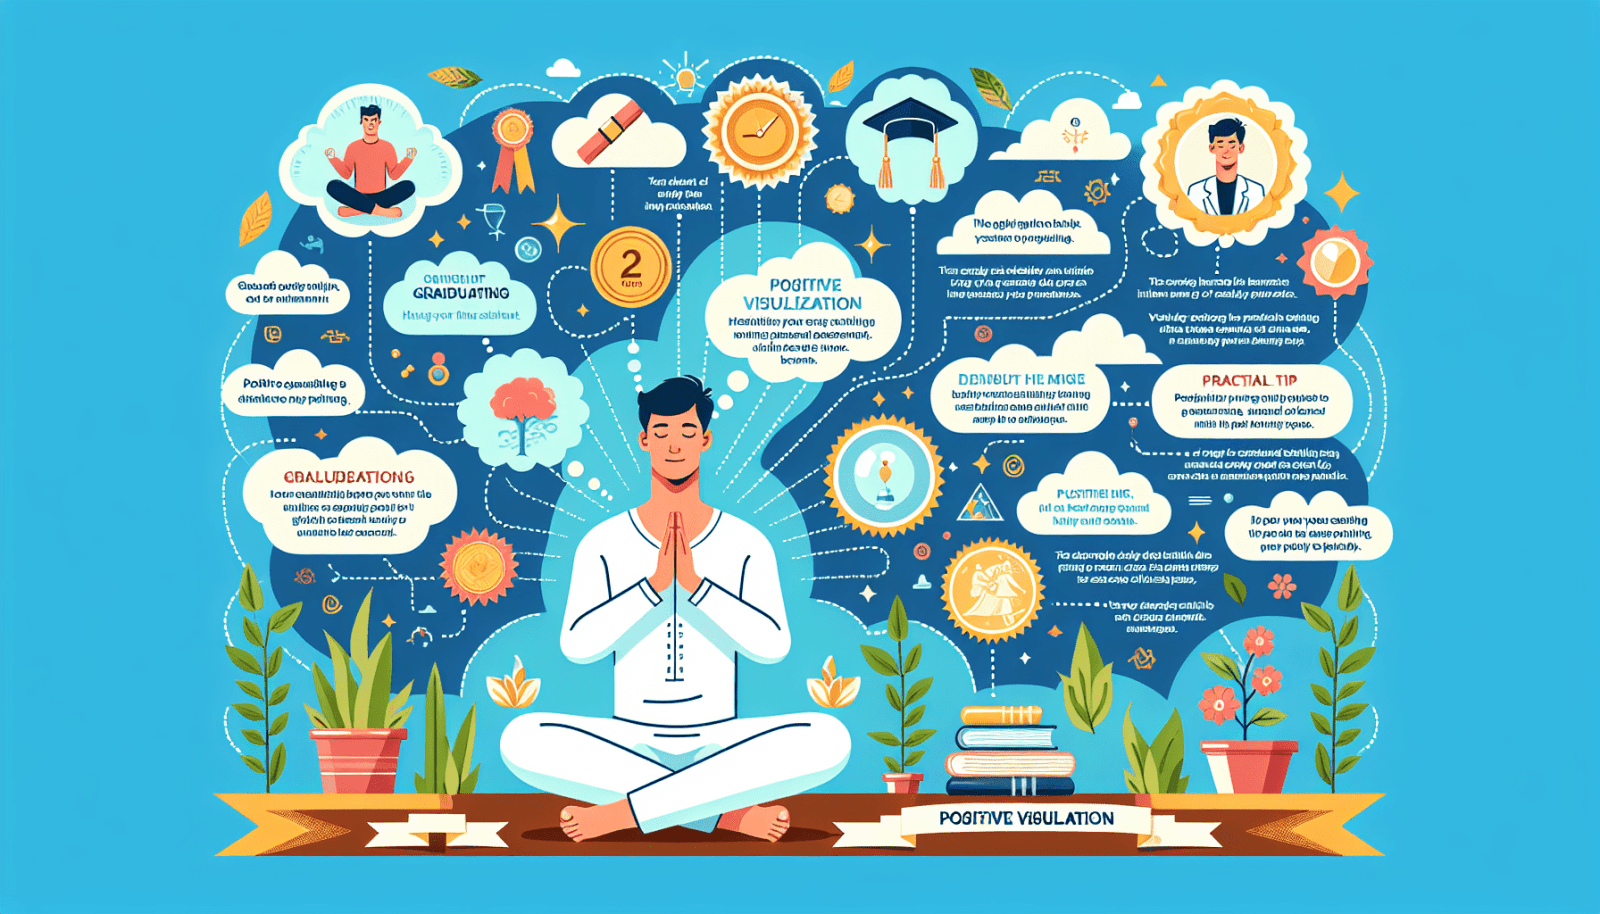 An illustration depicting a central male figure meditating surrounded by various infographic elements, icons, and thought bubbles related to mindfulness and positive visualization strategies, set against a blue background with decorative plants.